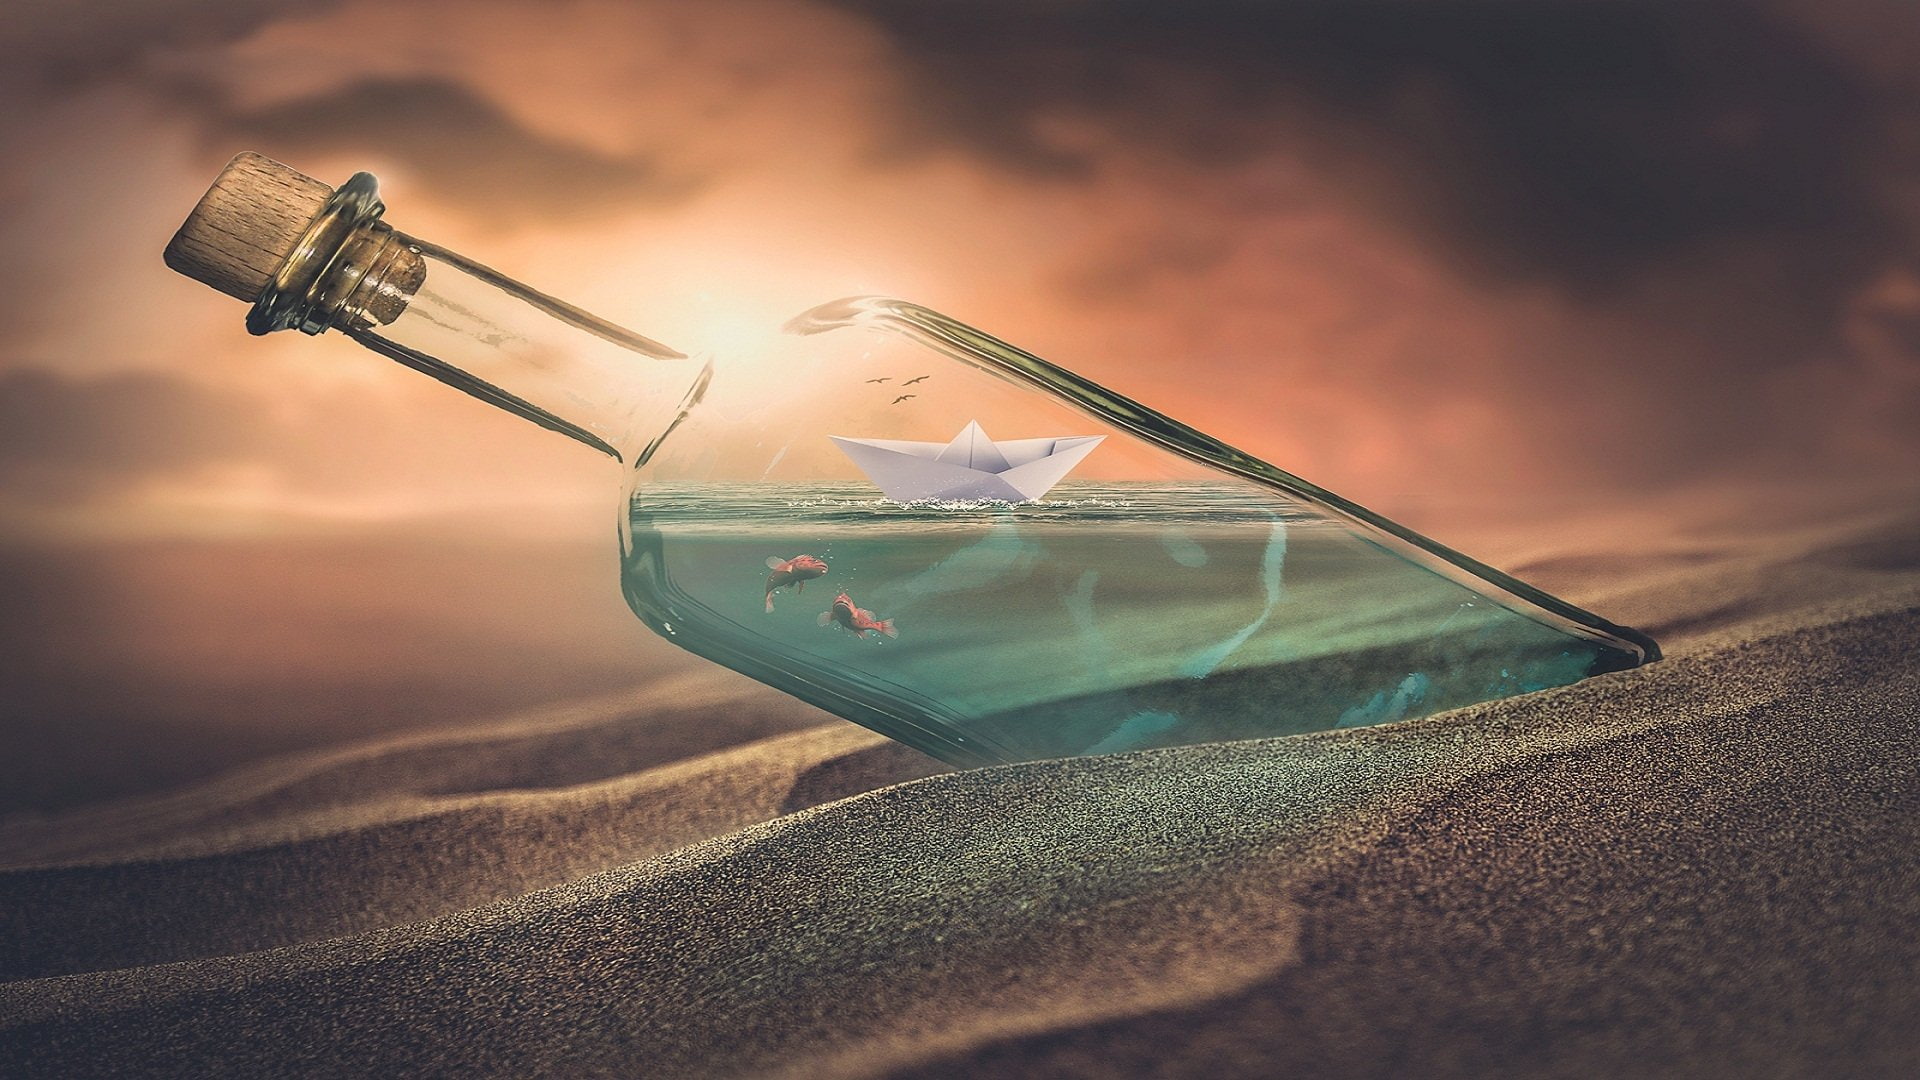 Man Made, Ship In A Bottle